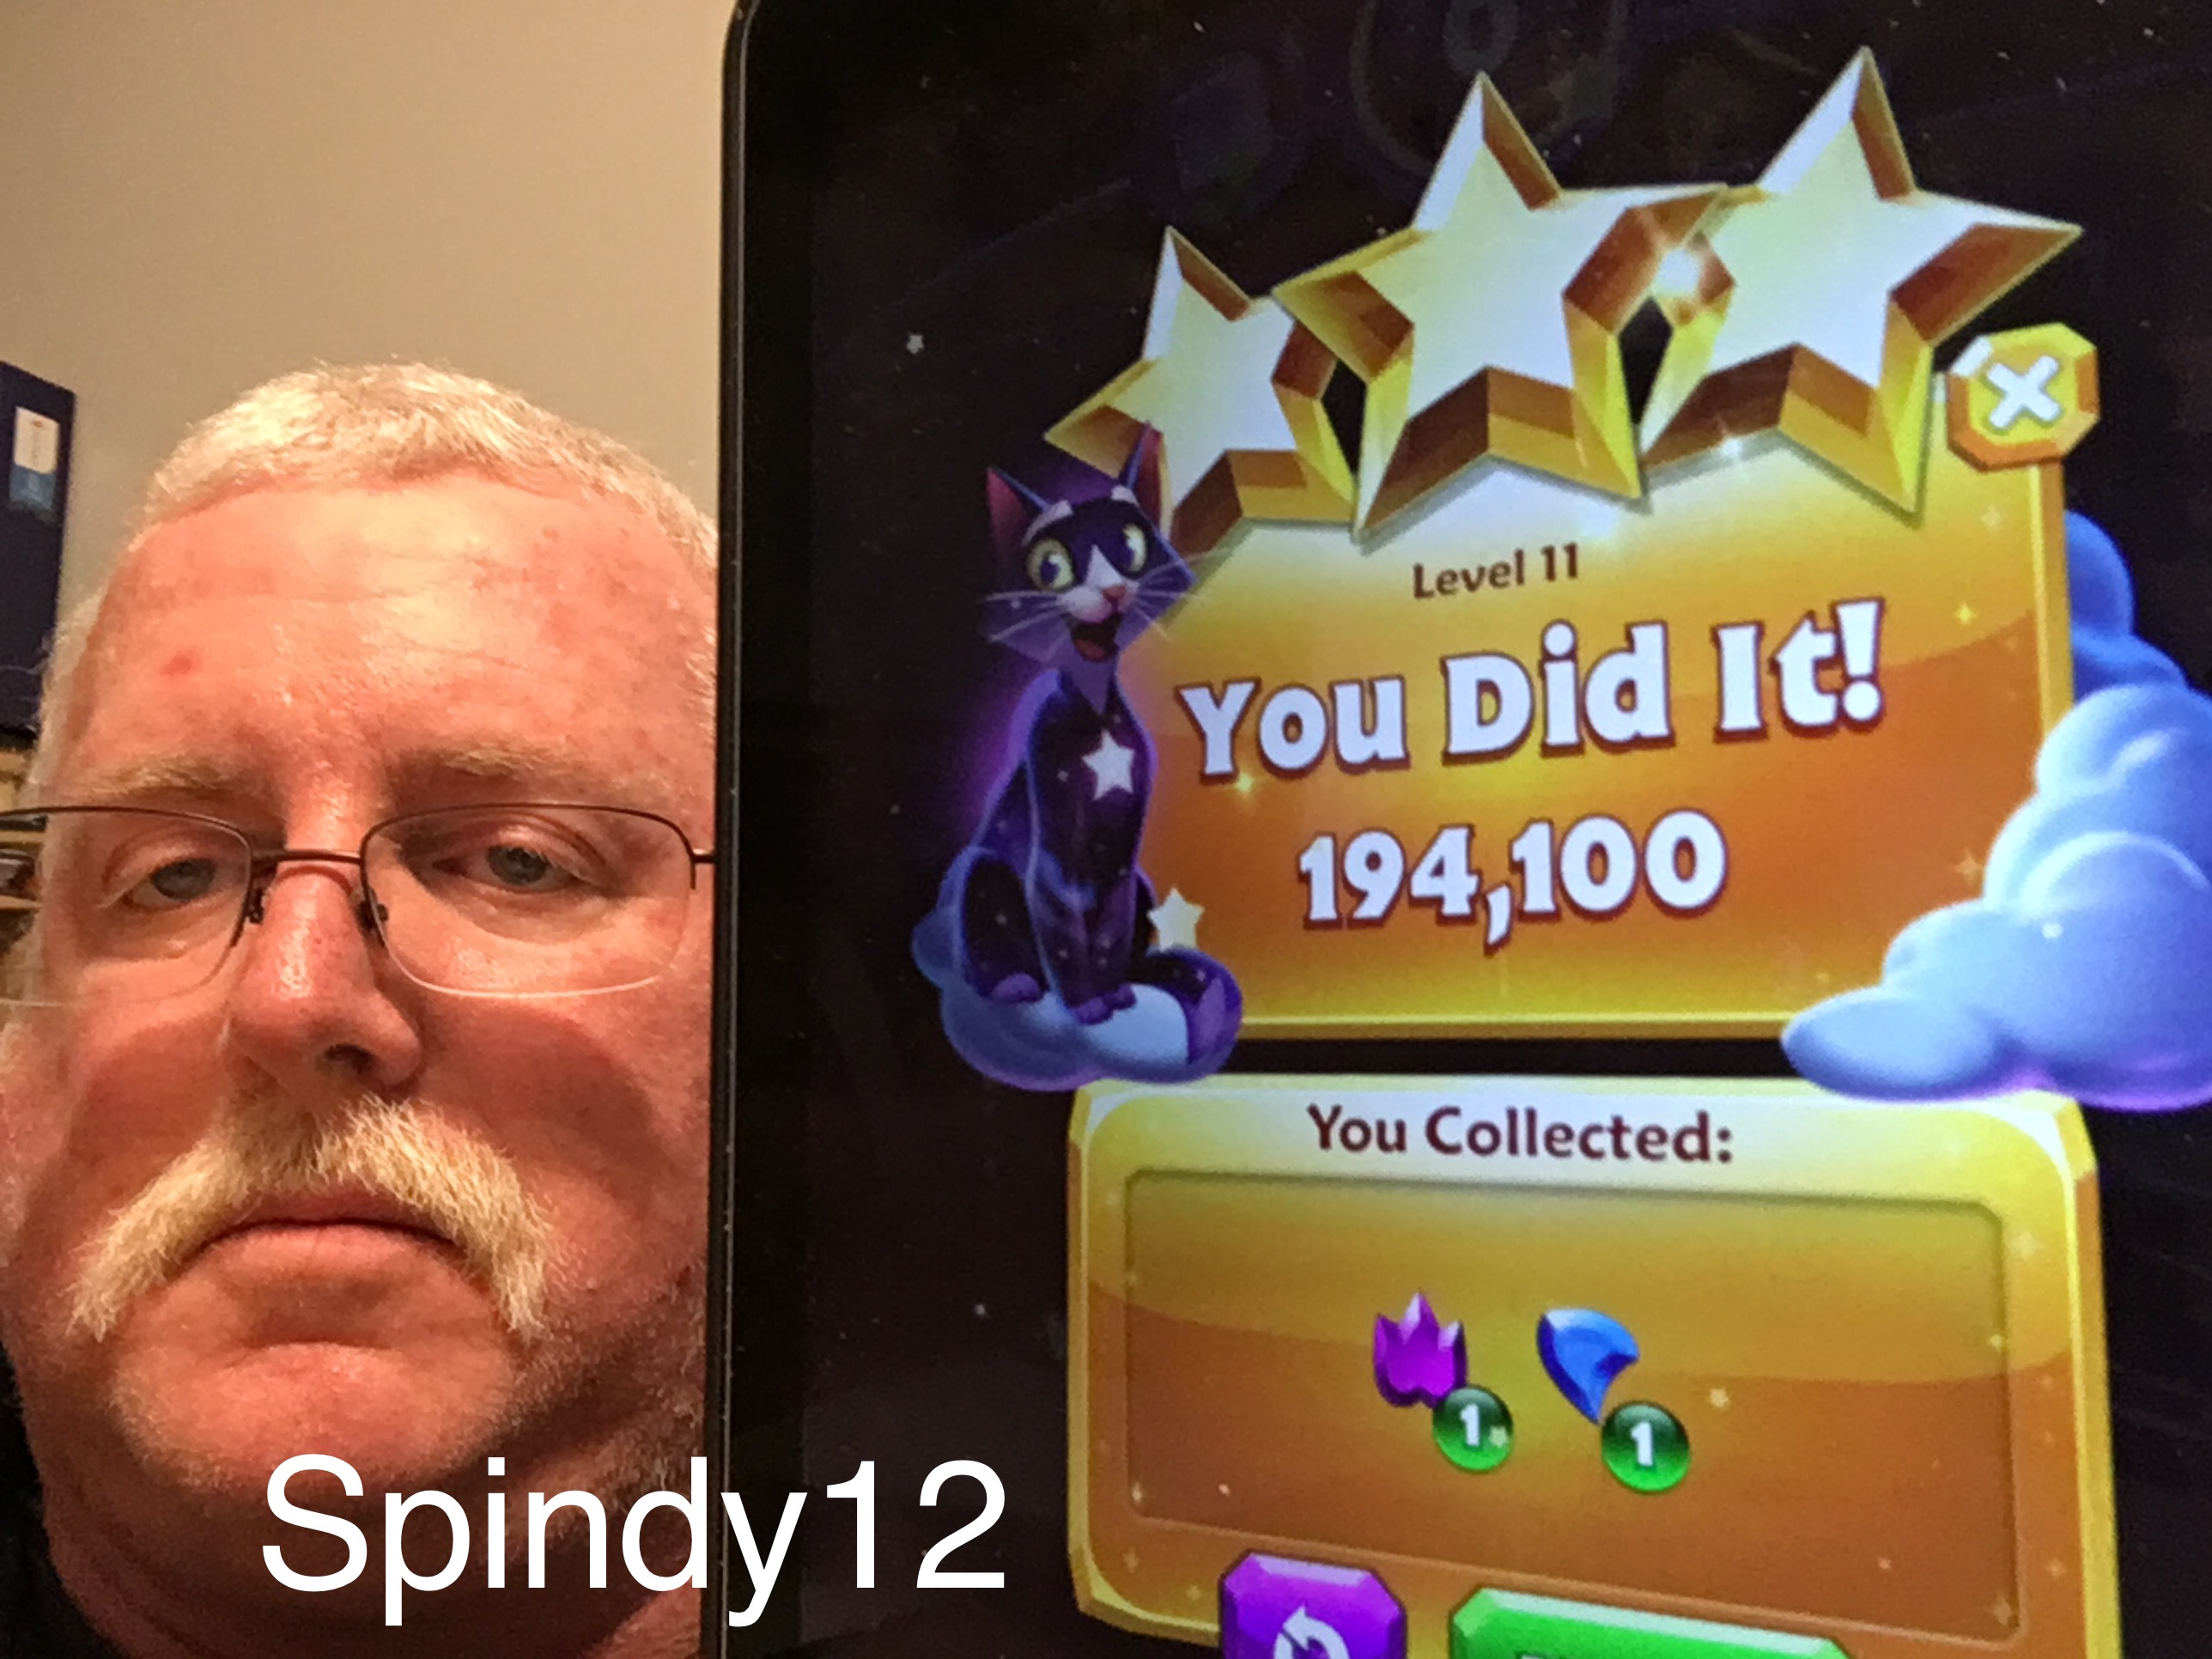 Spindy12: Bejeweled Stars: Level 11 - Double Love (iOS) 194,100 points on 2016-12-25 07:44:17